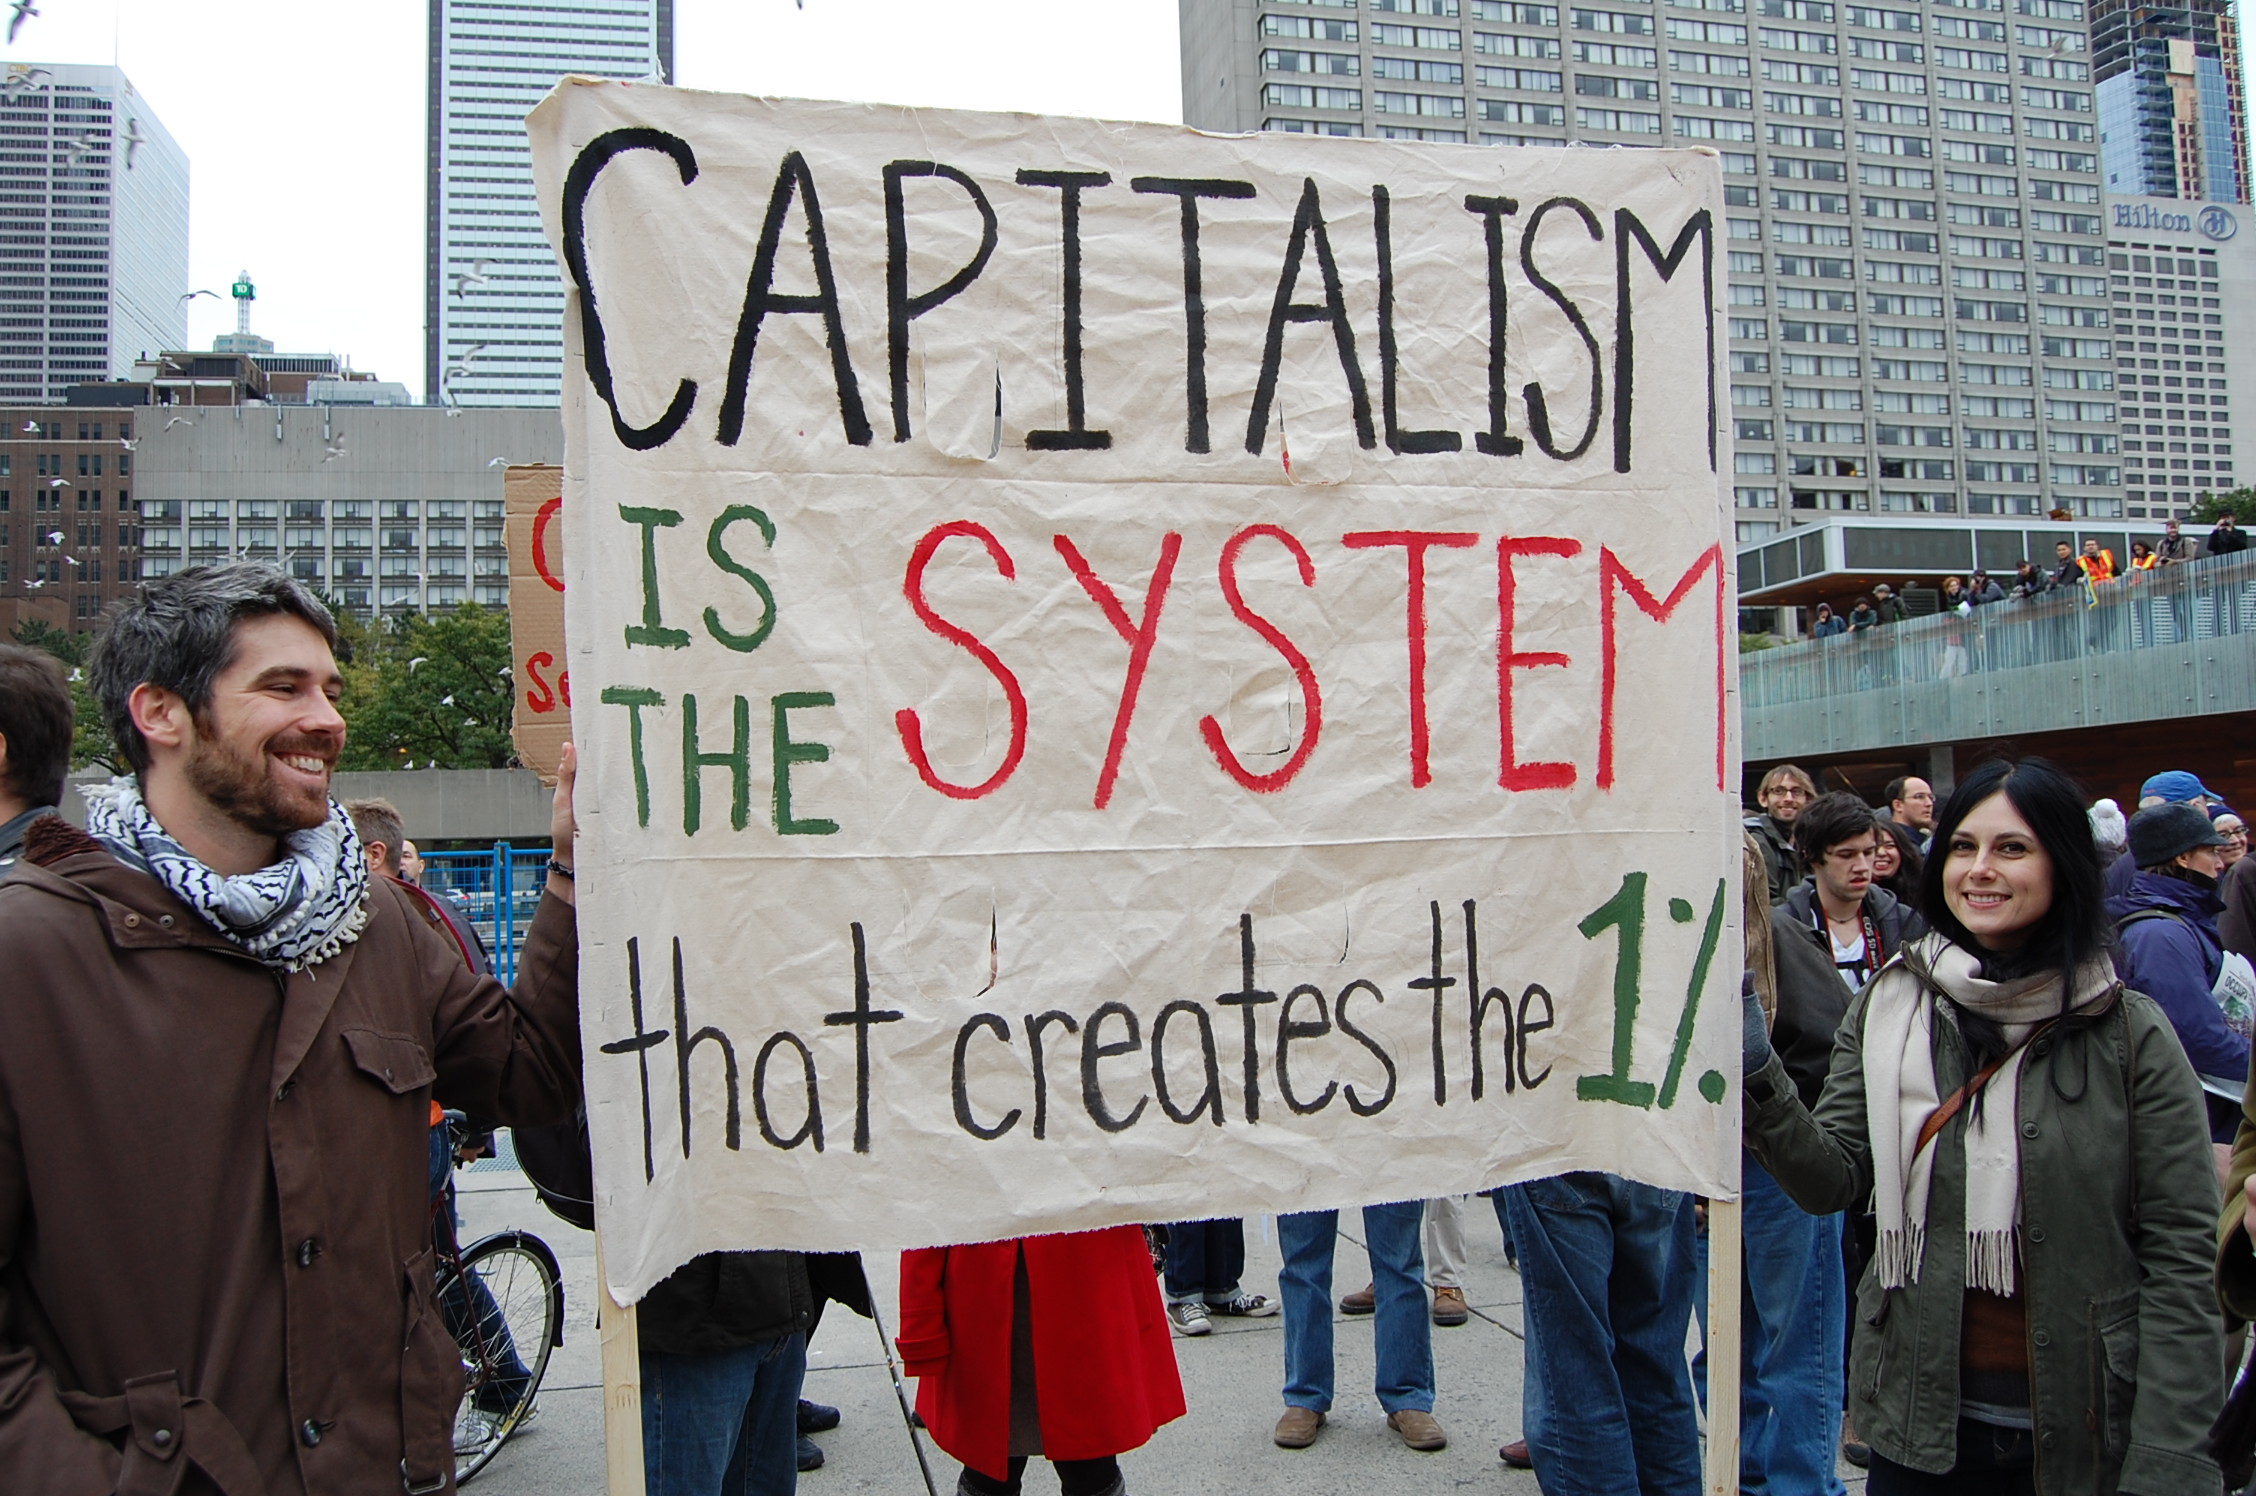 DGR action call: Occupy the Machine, Stop the 1%, Literally